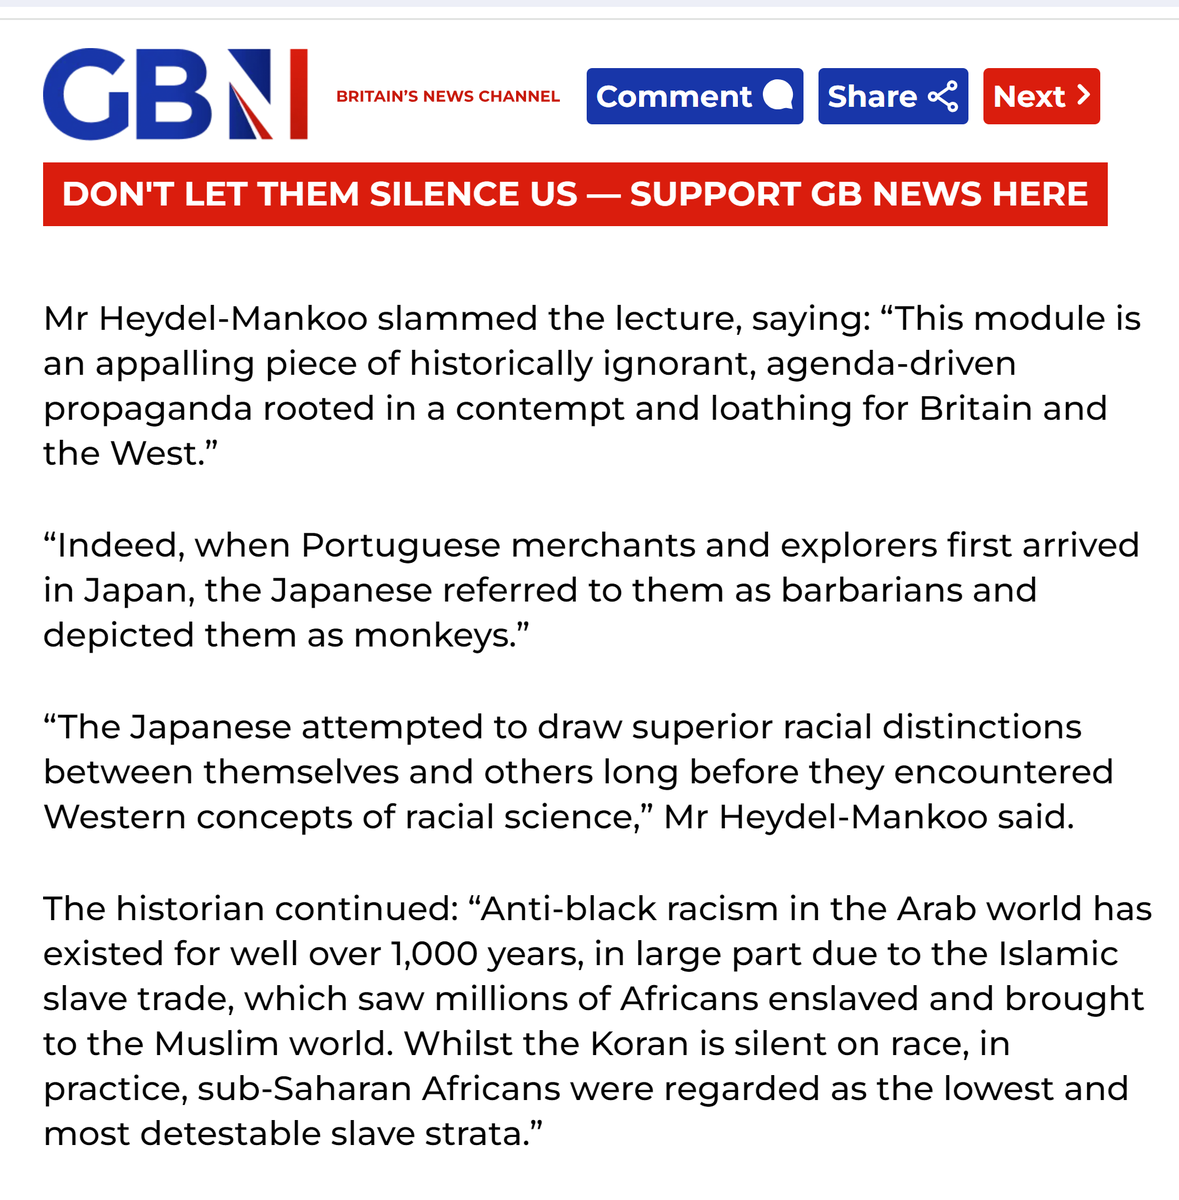 I'm quoted in this exclusive report revealing the Home Office is indoctrinating staff with fake, anti-Western history To claim that racism is a creation of the West is arrant nonsense. Racism has been a global phenomenon for millennia & long predates the rise of Portugal…